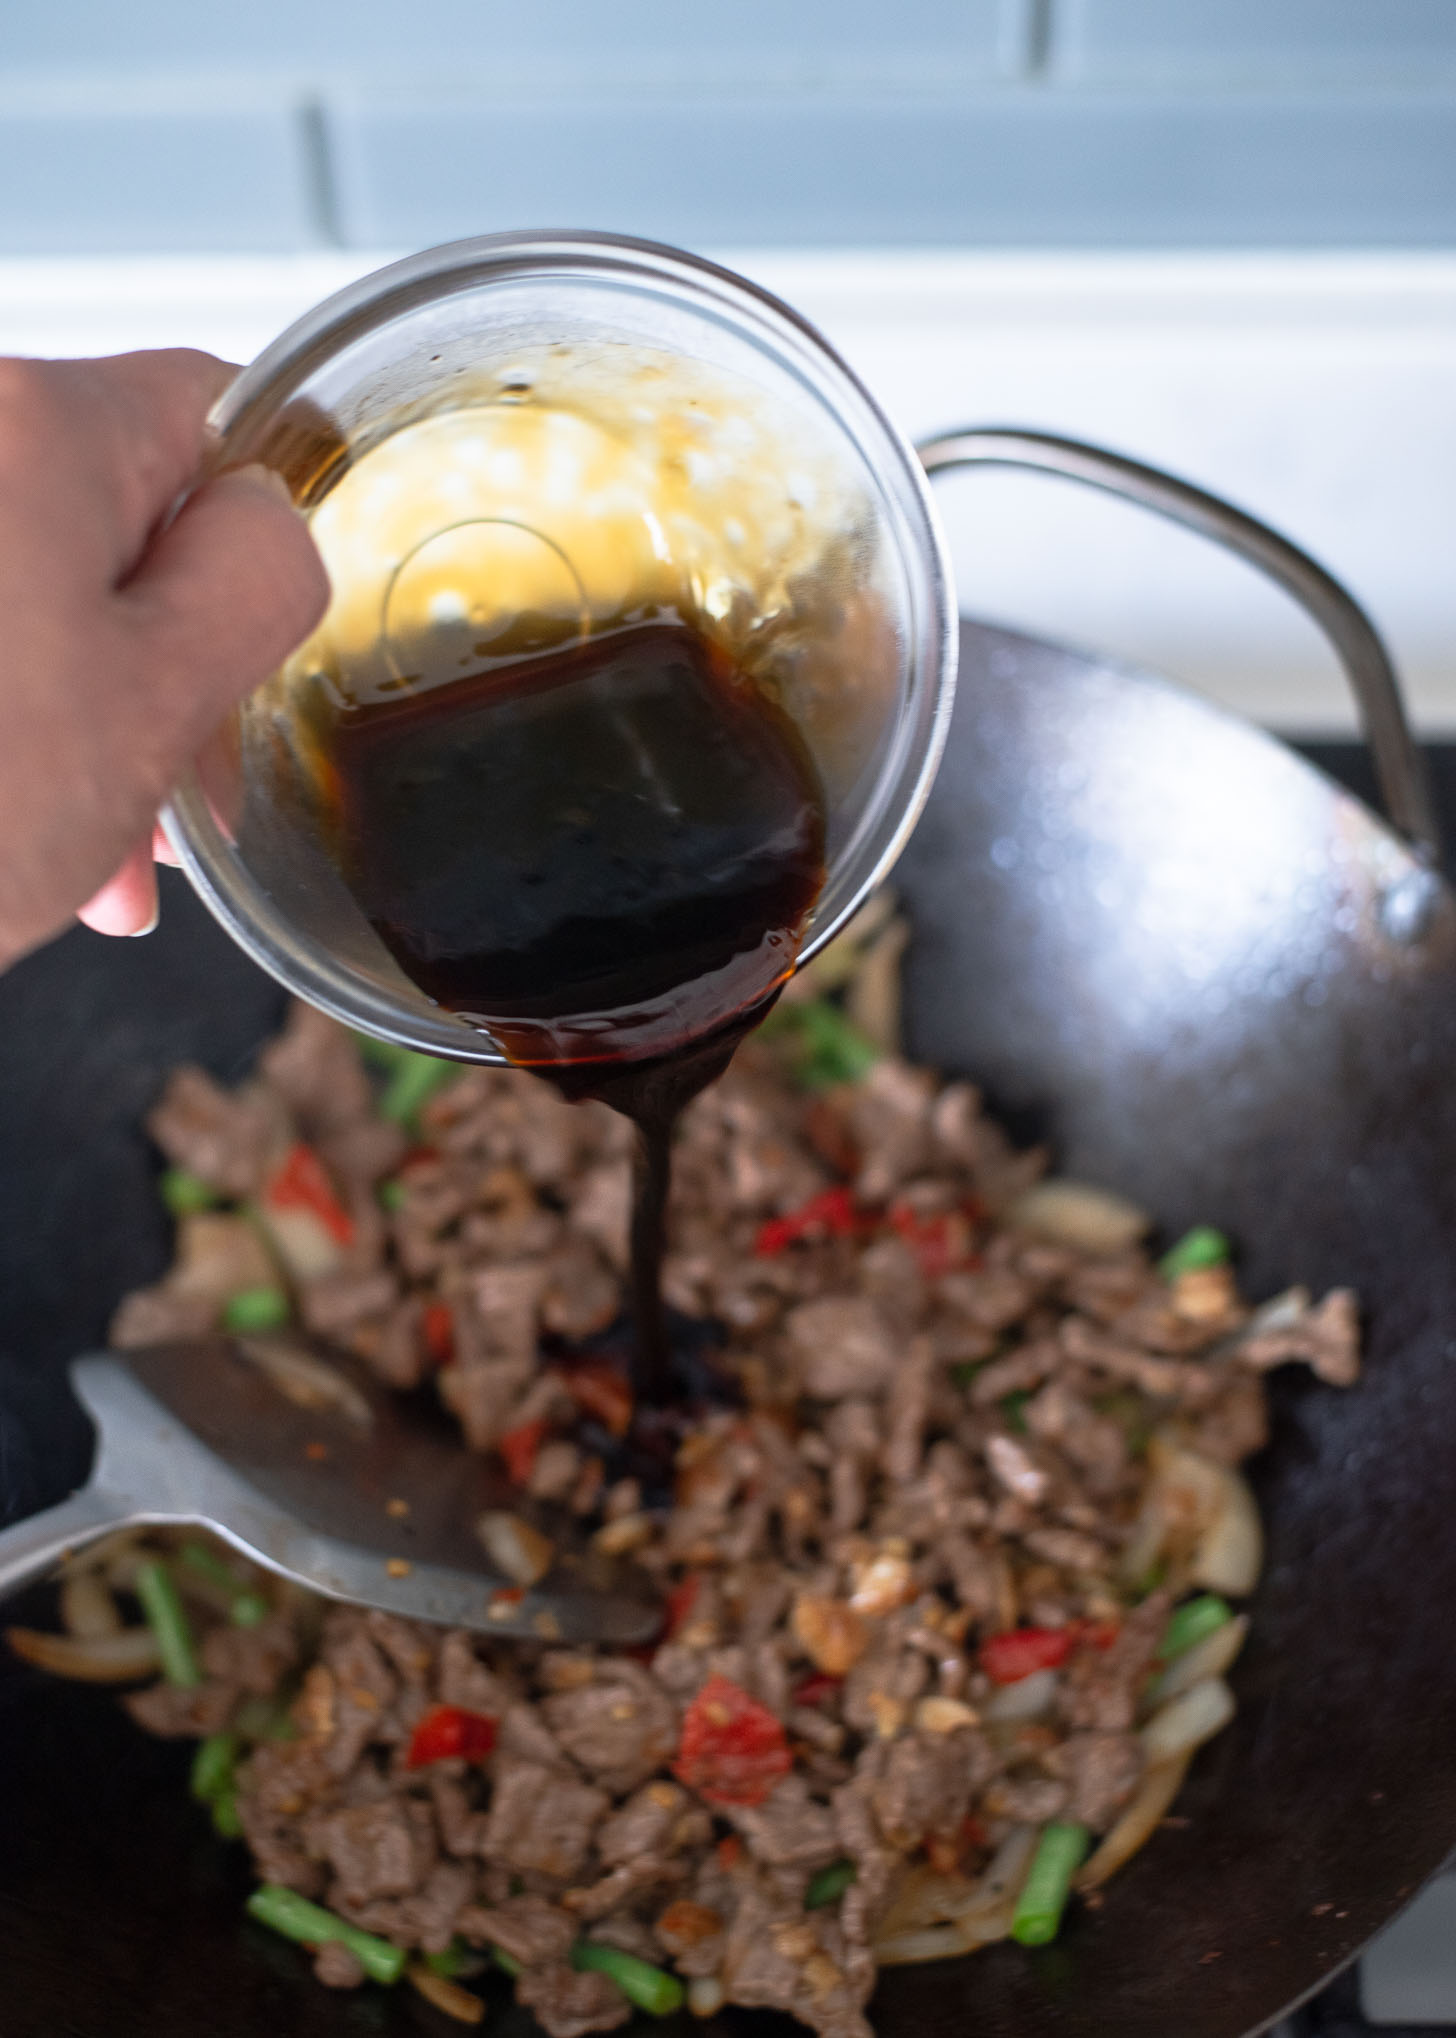 Thai basil beef sauce is added to the beef stir fry in a wok.